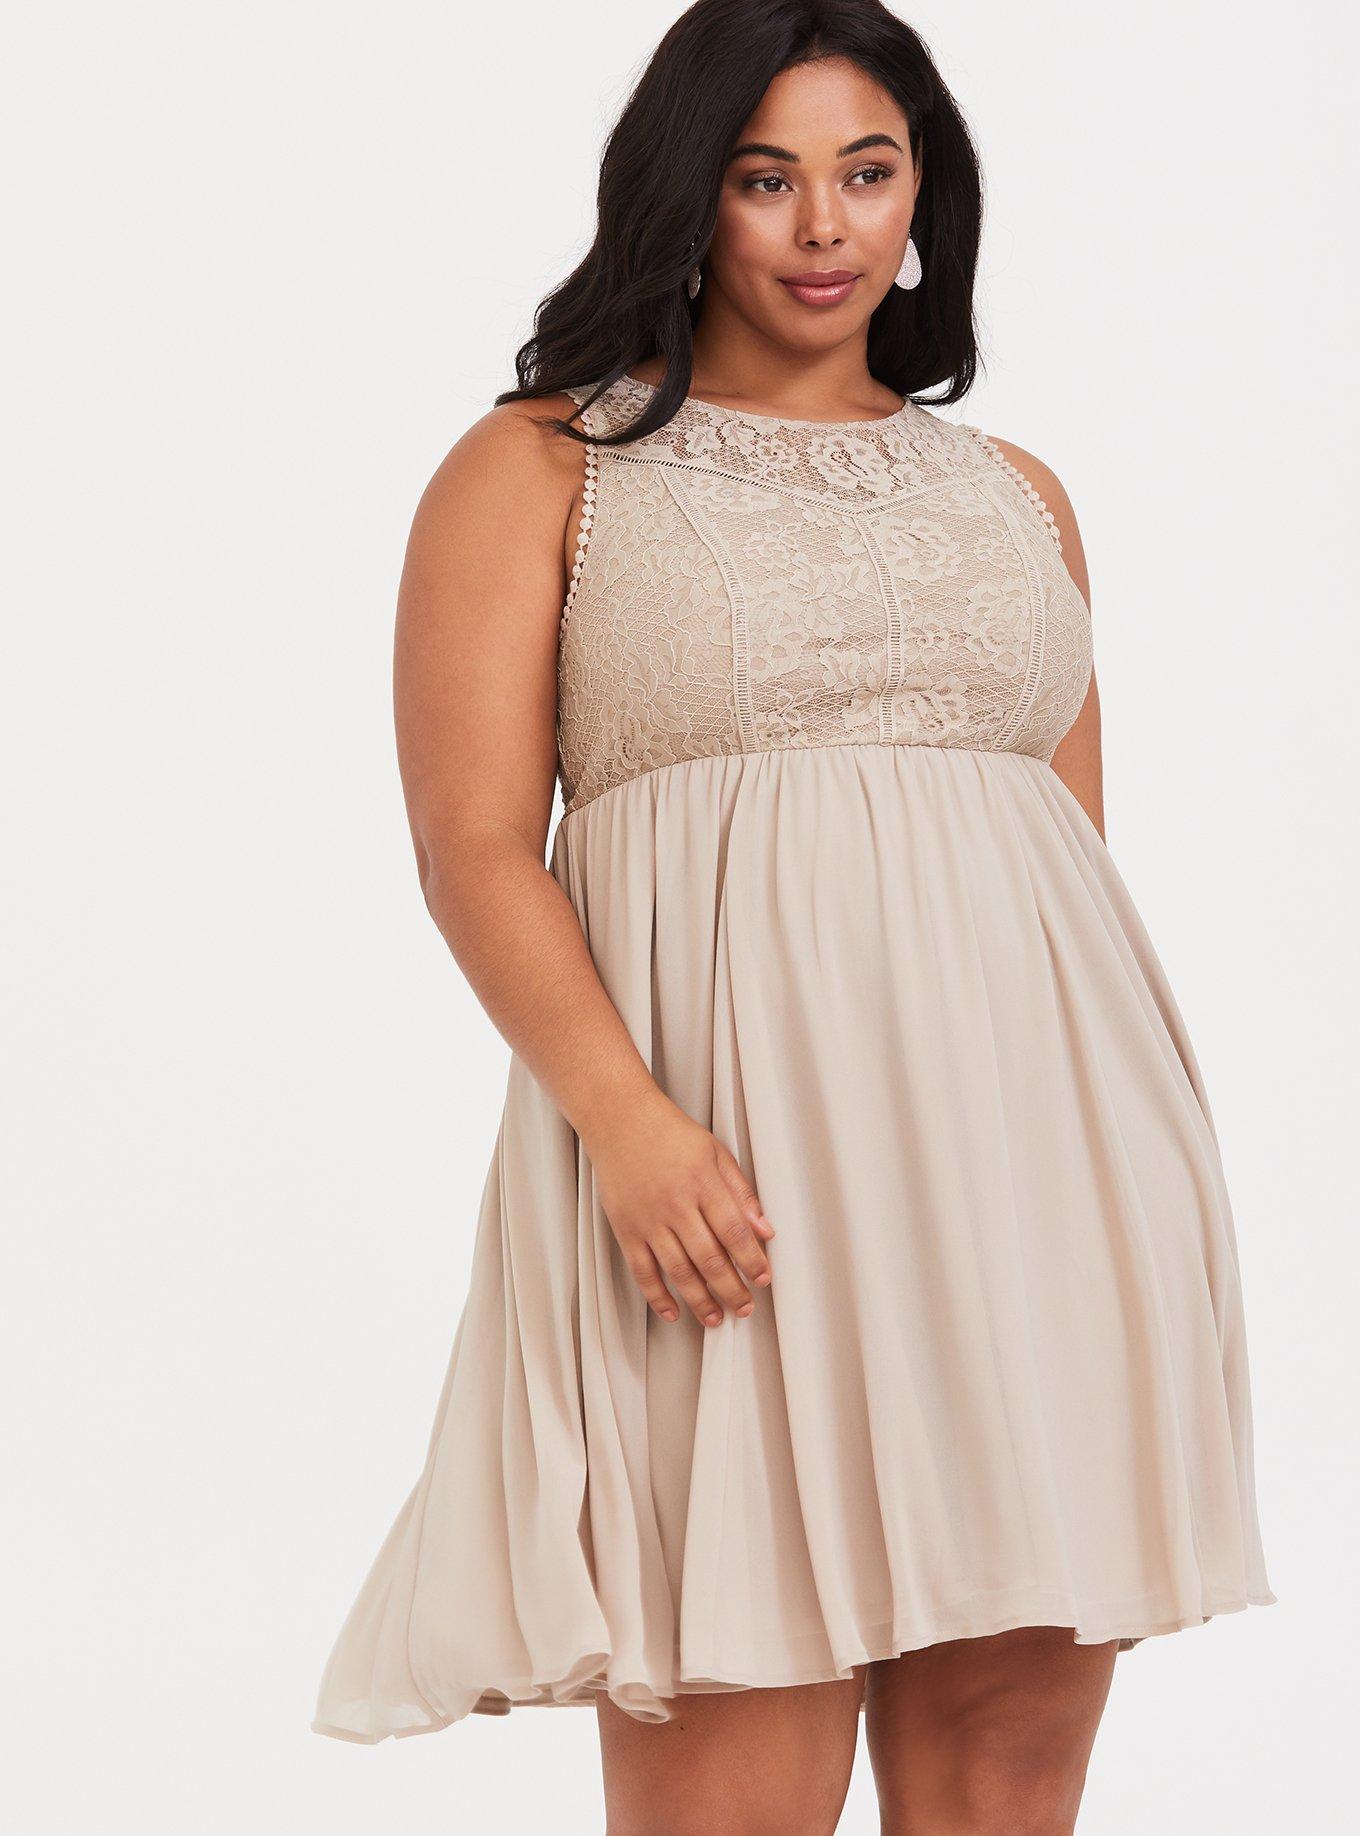 Torrid Plus Size Women's Clothing for sale in Saint Stephens, New